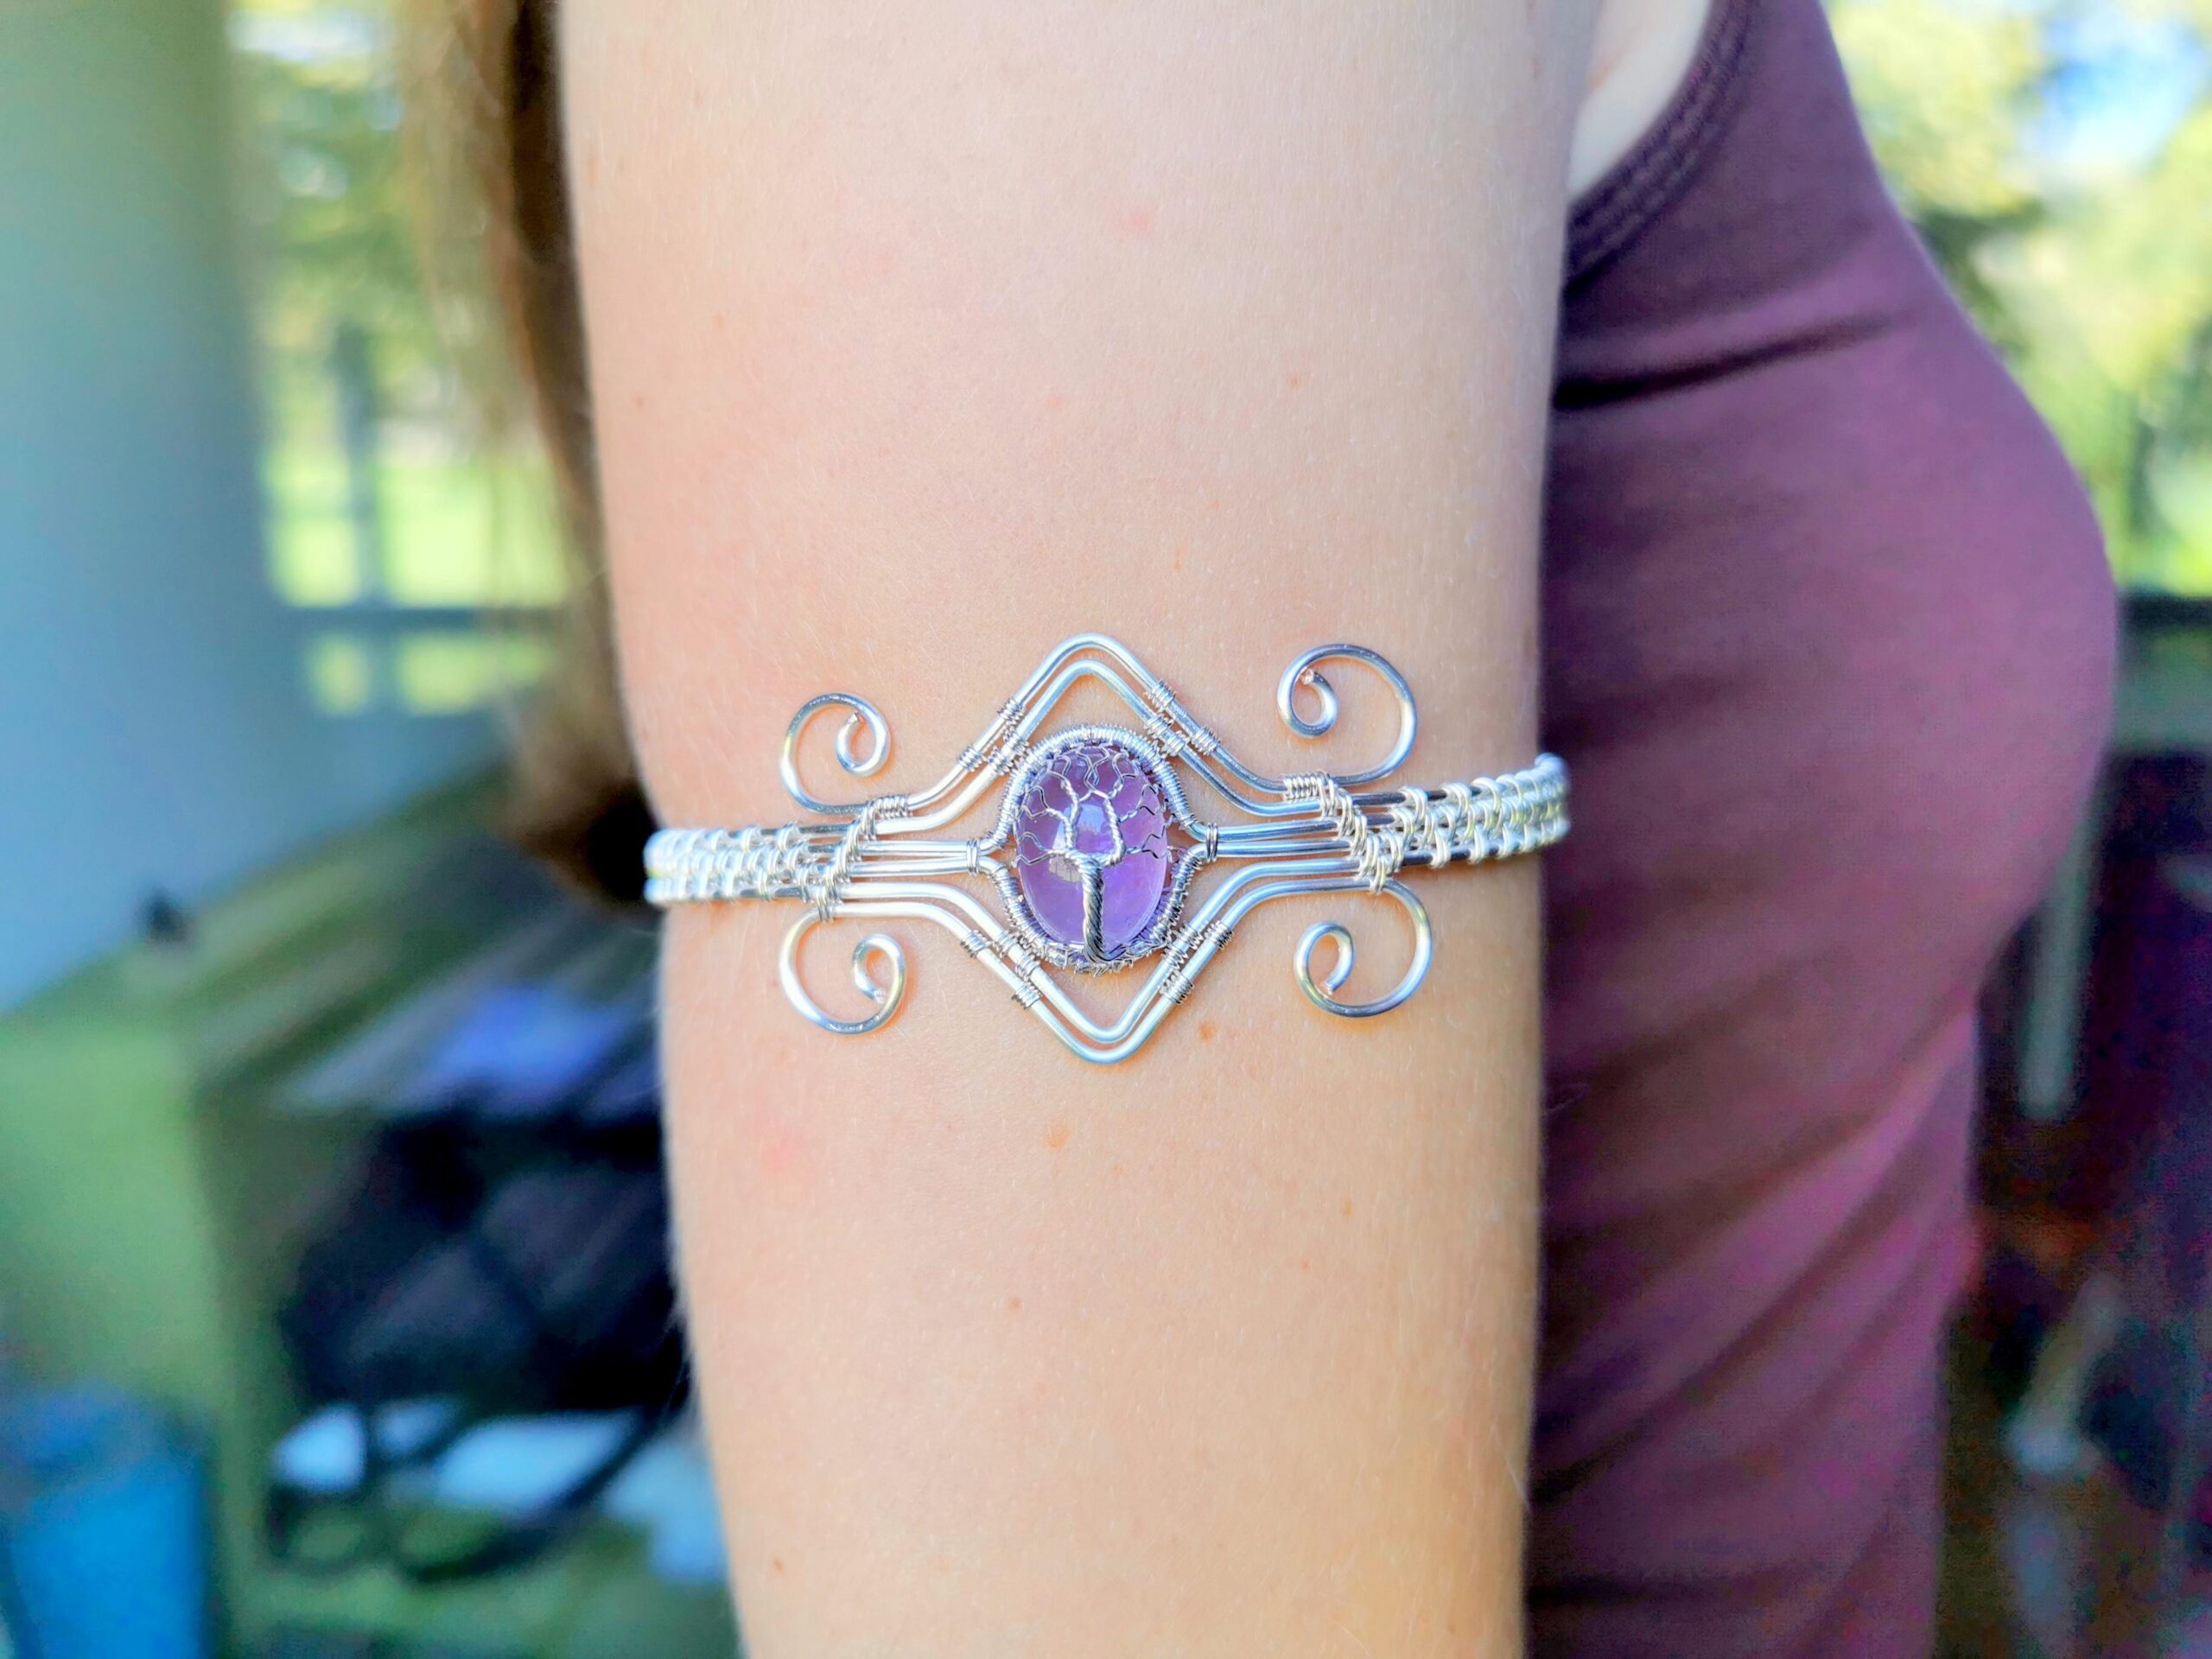 A tree armlet I made with an amethyst.